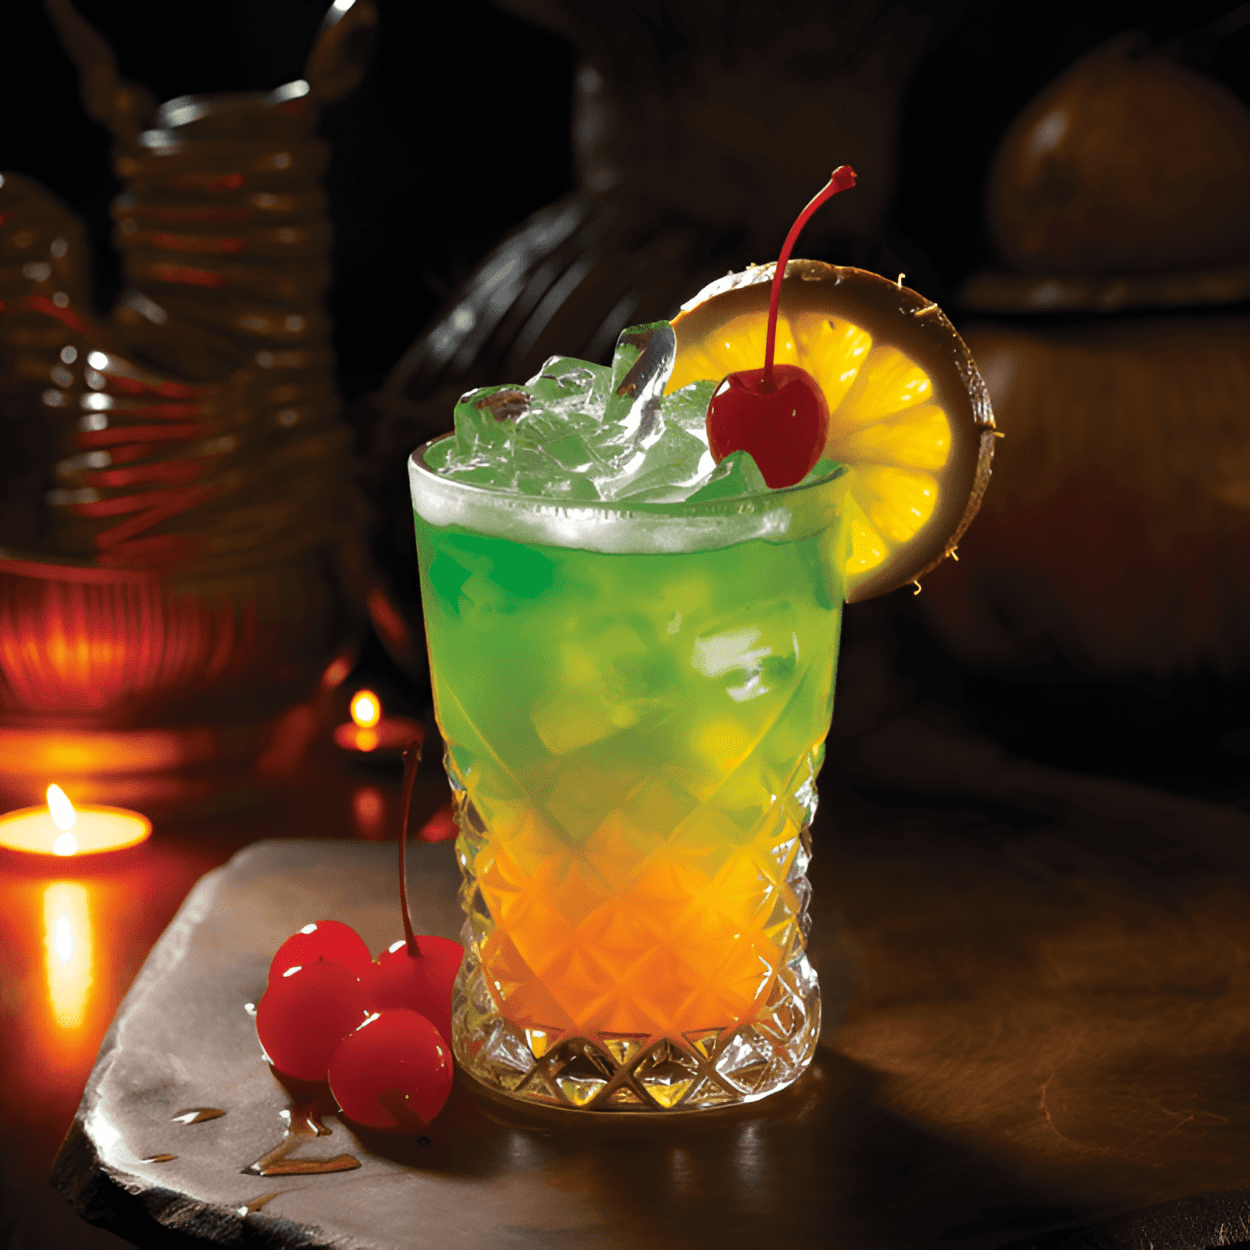 Cobra's Fang Cocktail Recipe - The Cobra's Fang is a complex and robust cocktail. It has a strong rum base, with a sweet and sour balance from the lime and orange. The addition of exotic spices adds a unique depth and warmth, making it a truly intriguing and satisfying drink.